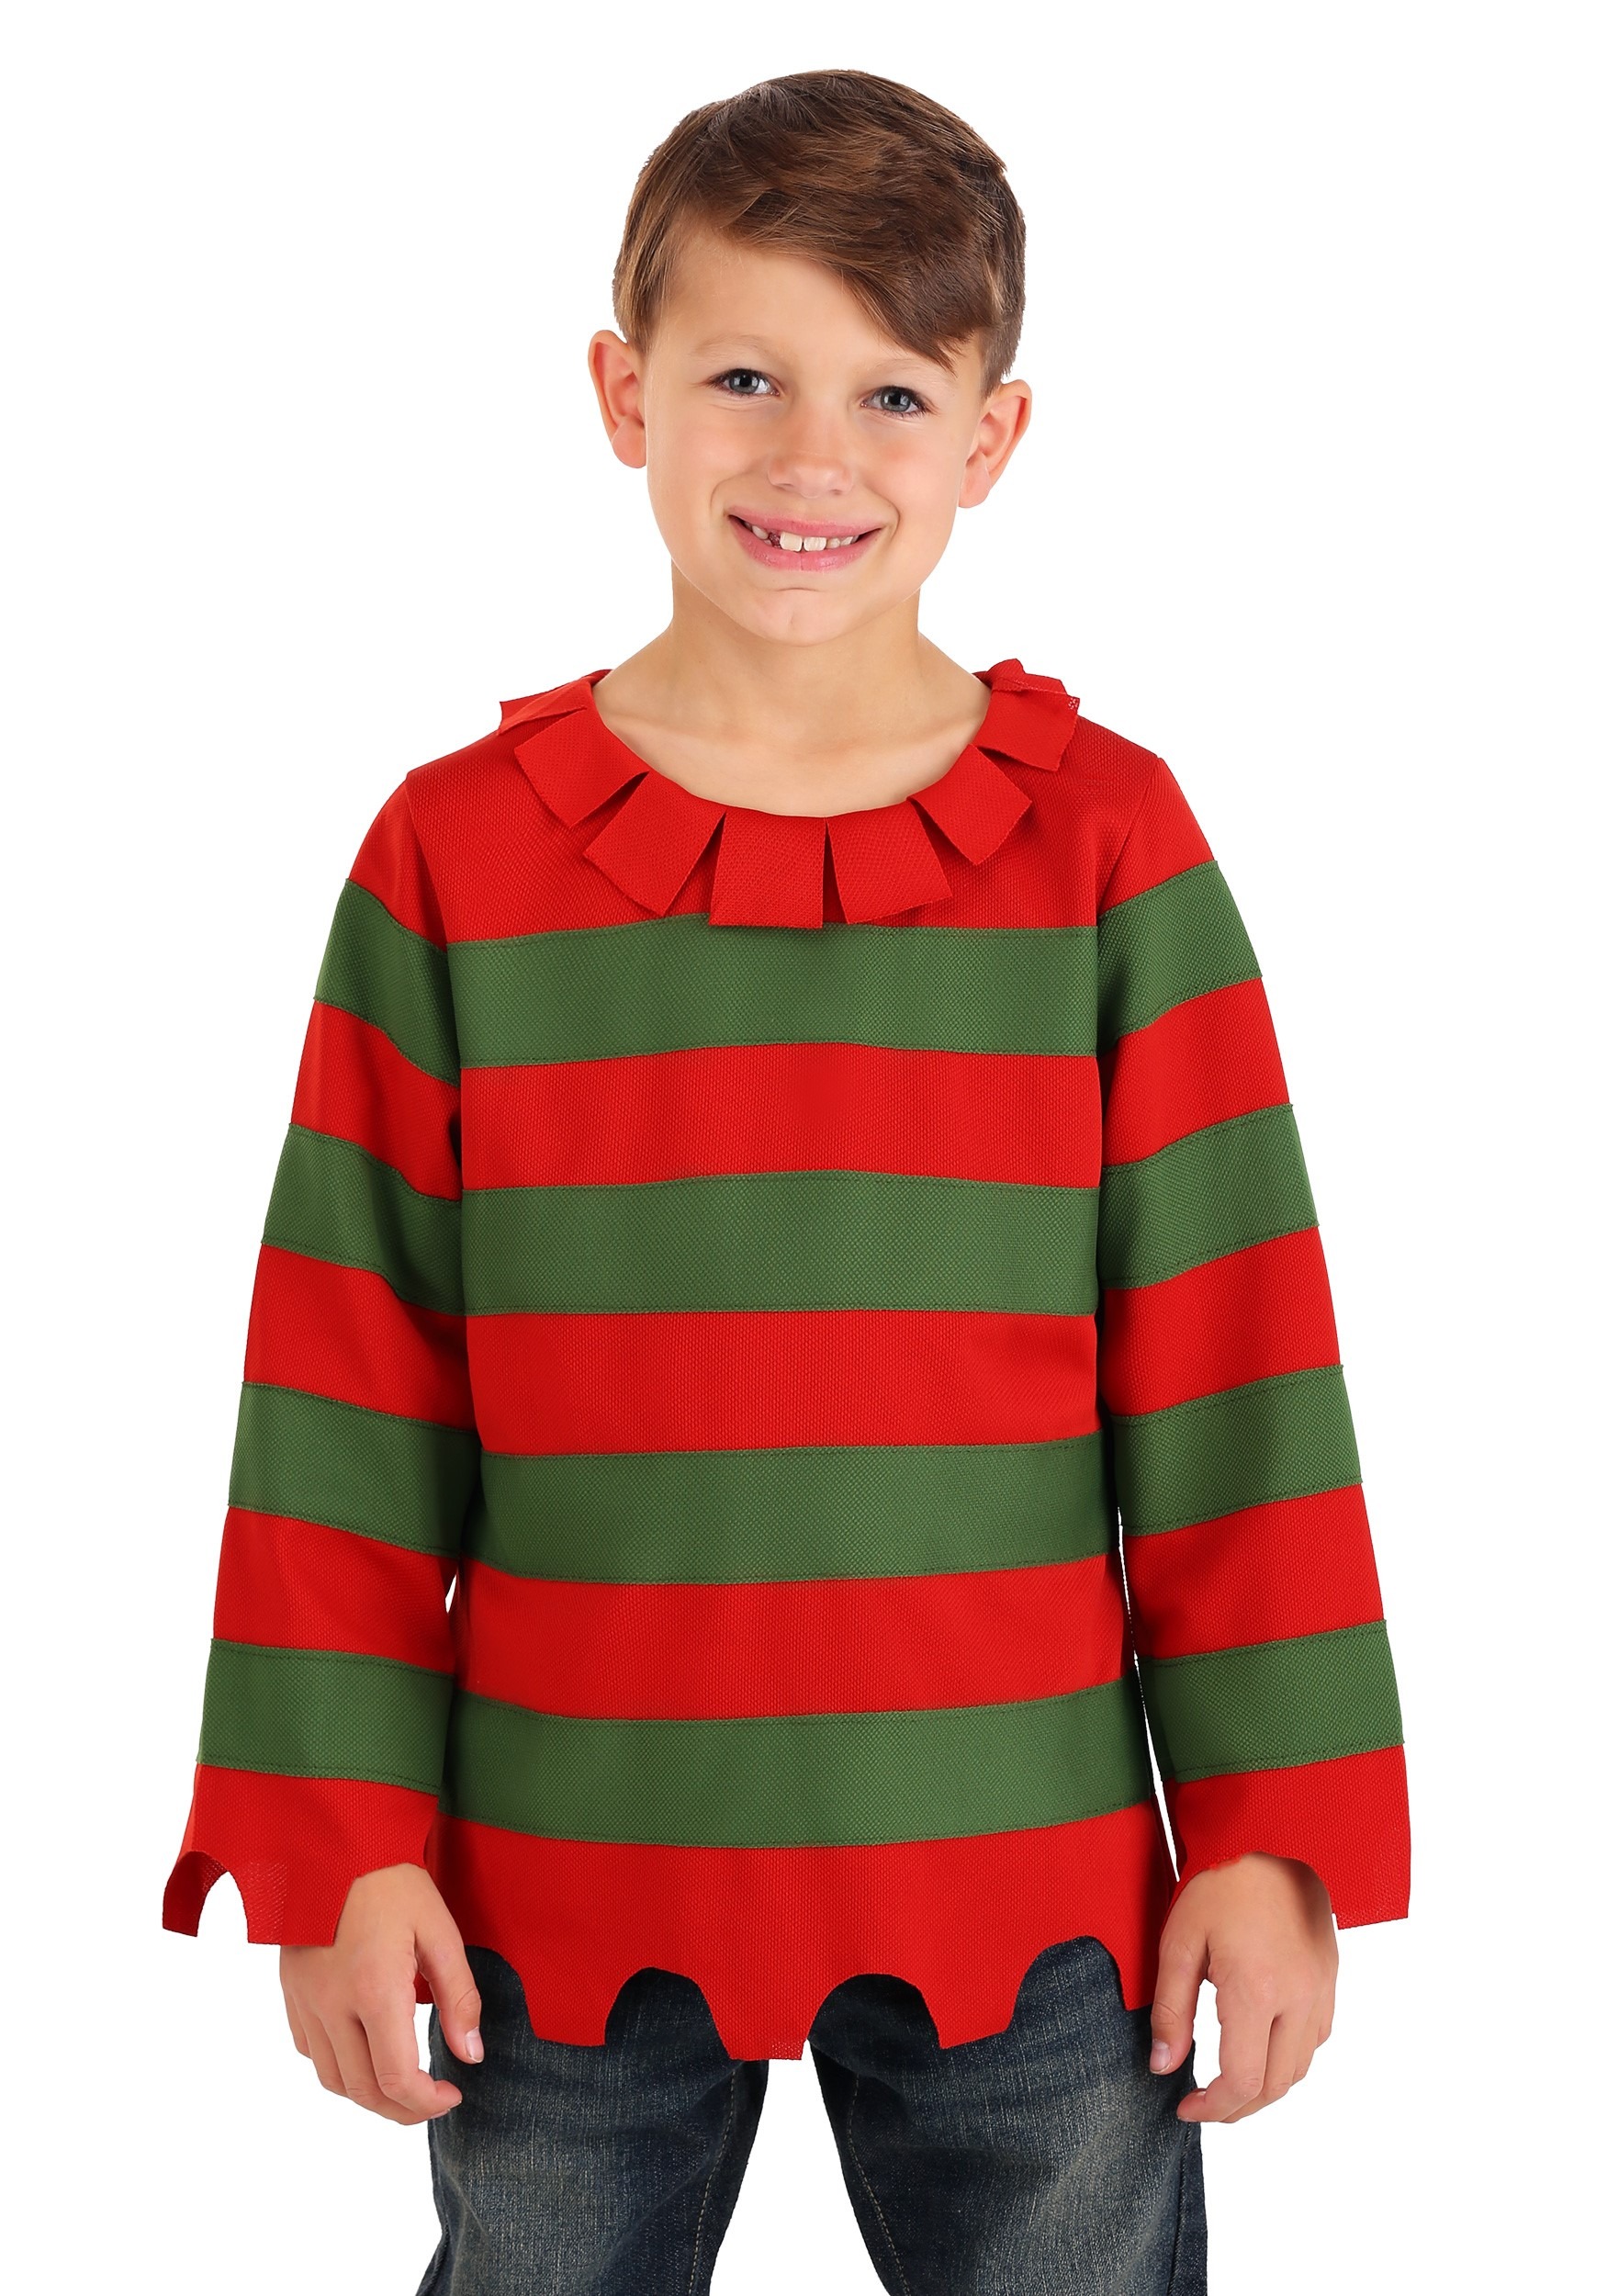 Photos - Fancy Dress FUN Costumes Nightmare Sweater Costume for Kids Green/Red FUN1609CH